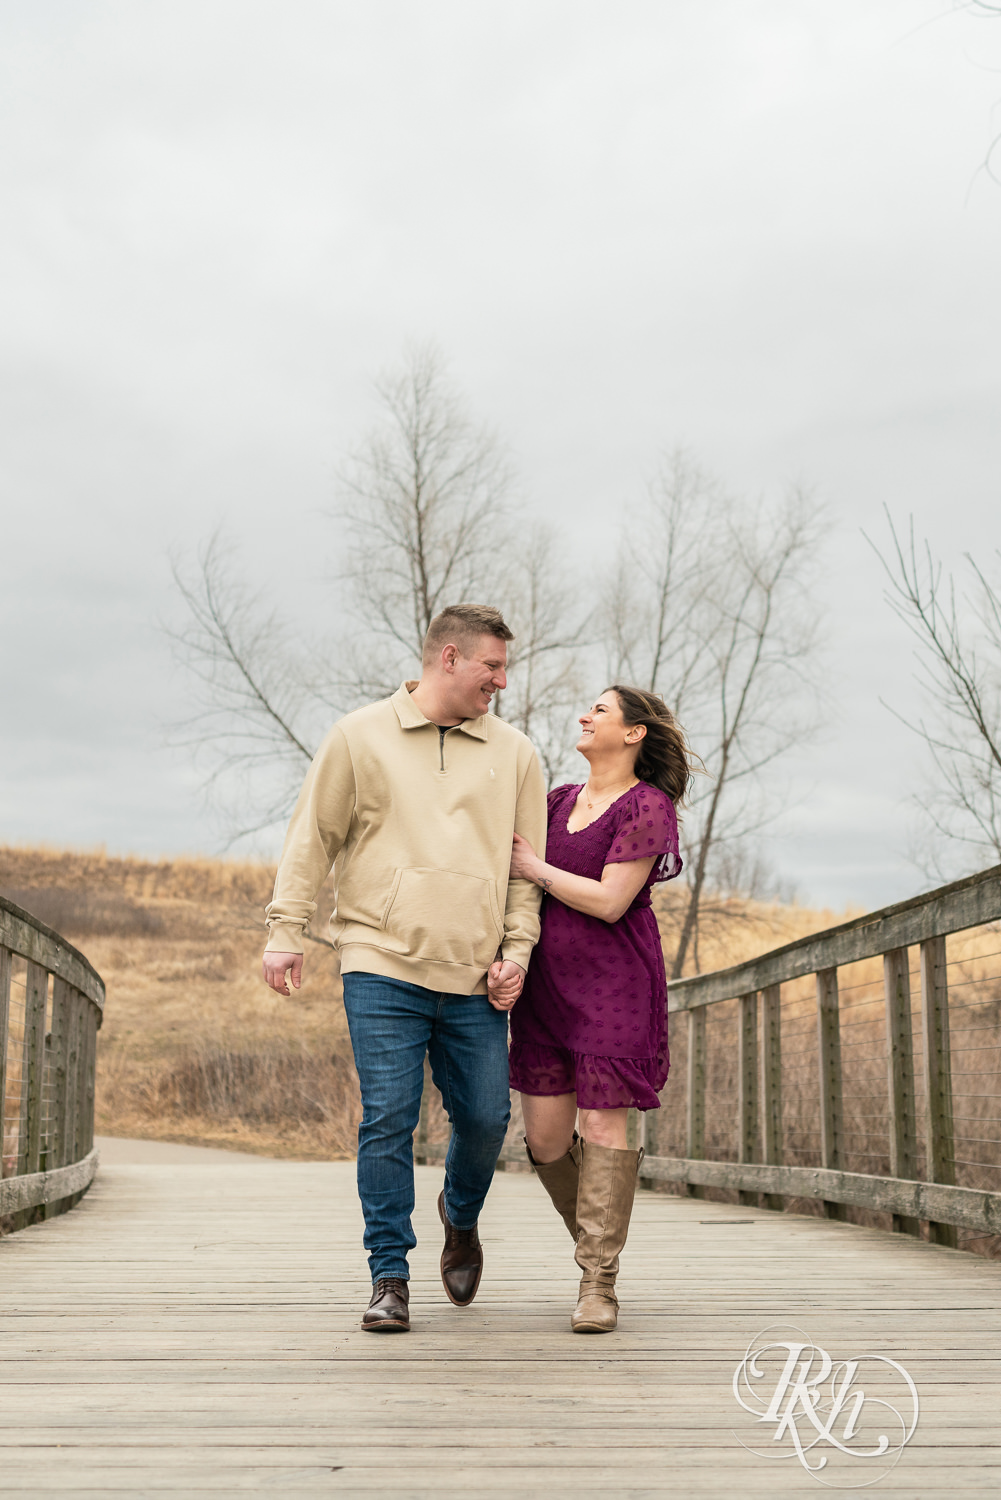 Man in jeans and woman in magenta dress laugh while walking on a bridge in Lebanon Hills in Eagan, Minnesota.